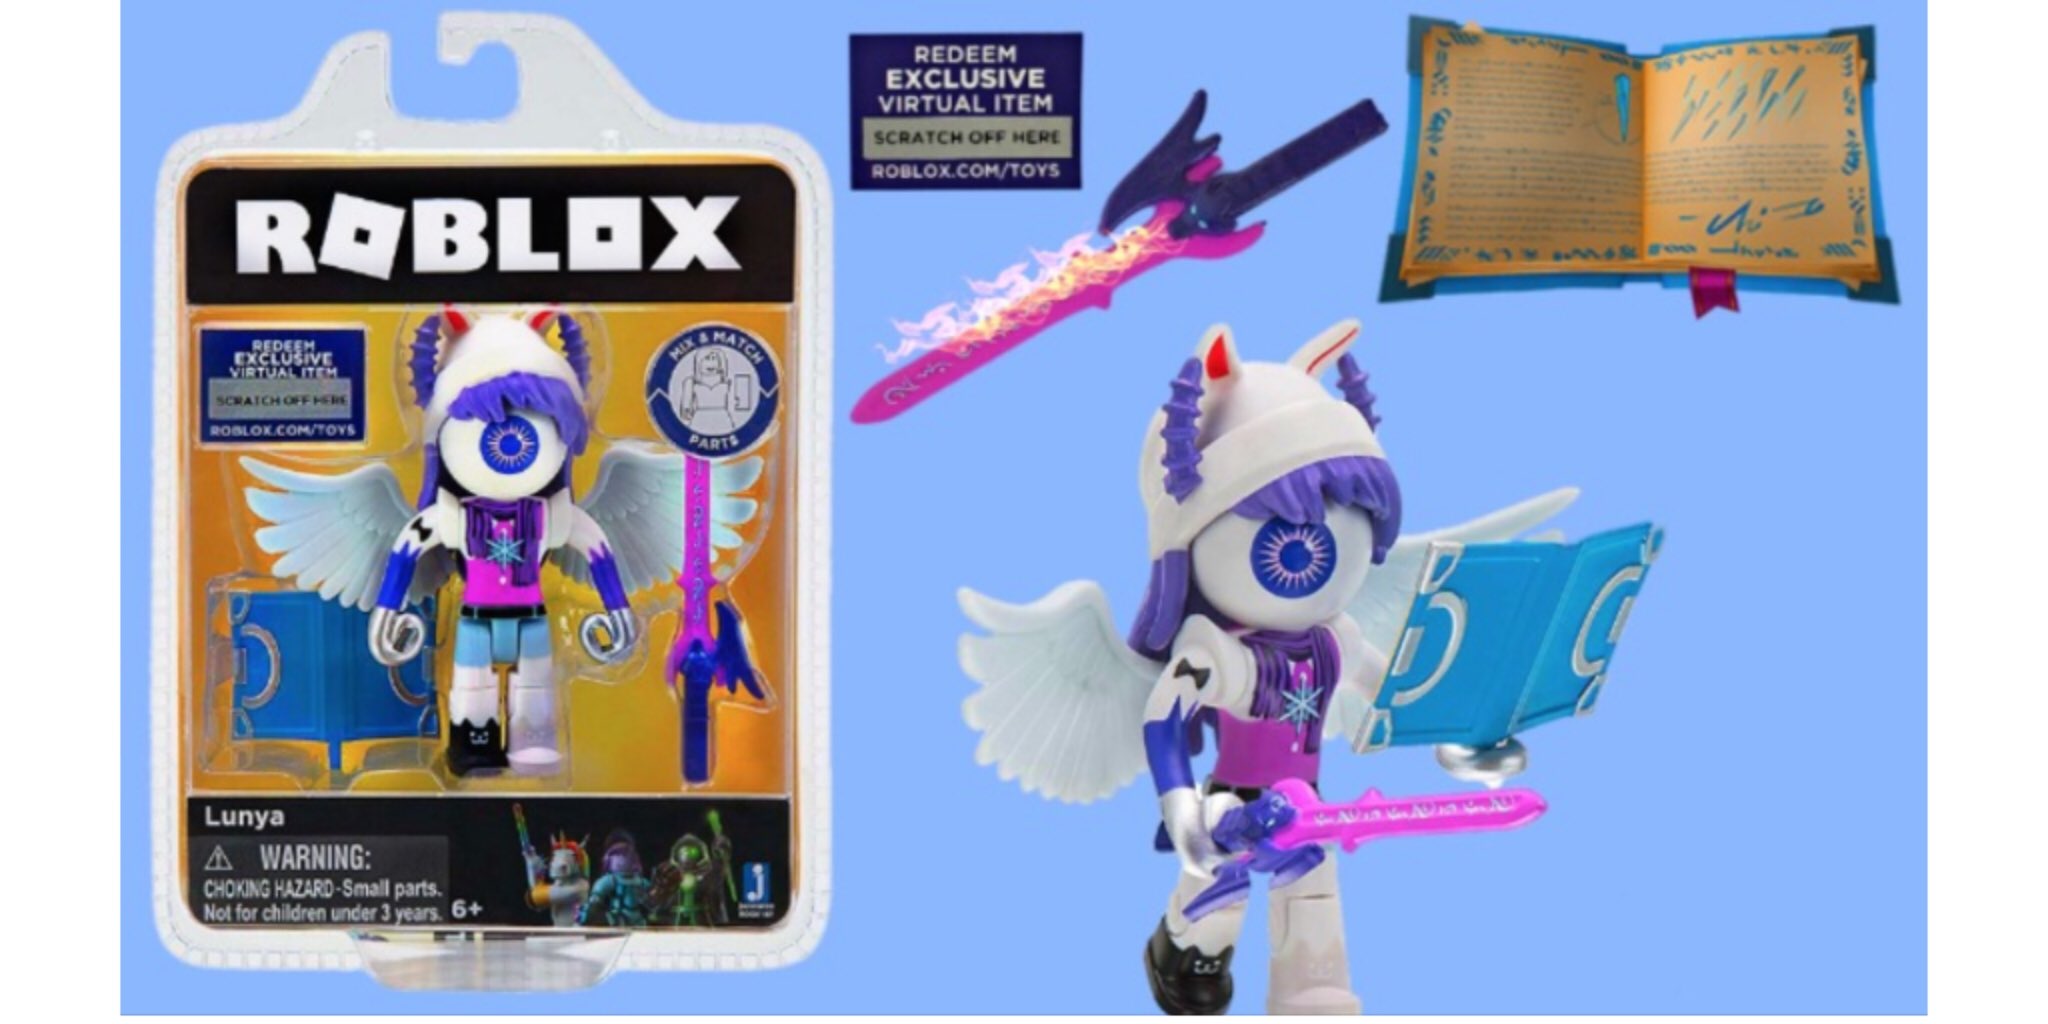 Lily On Twitter Best Part Of Unboxing The Roblox Toys Is Finding All The Toy Accessories In The Catalog And Trying Them Out The Lunya Toy Has Great Pieces And Is Very - roblox toy unboxing